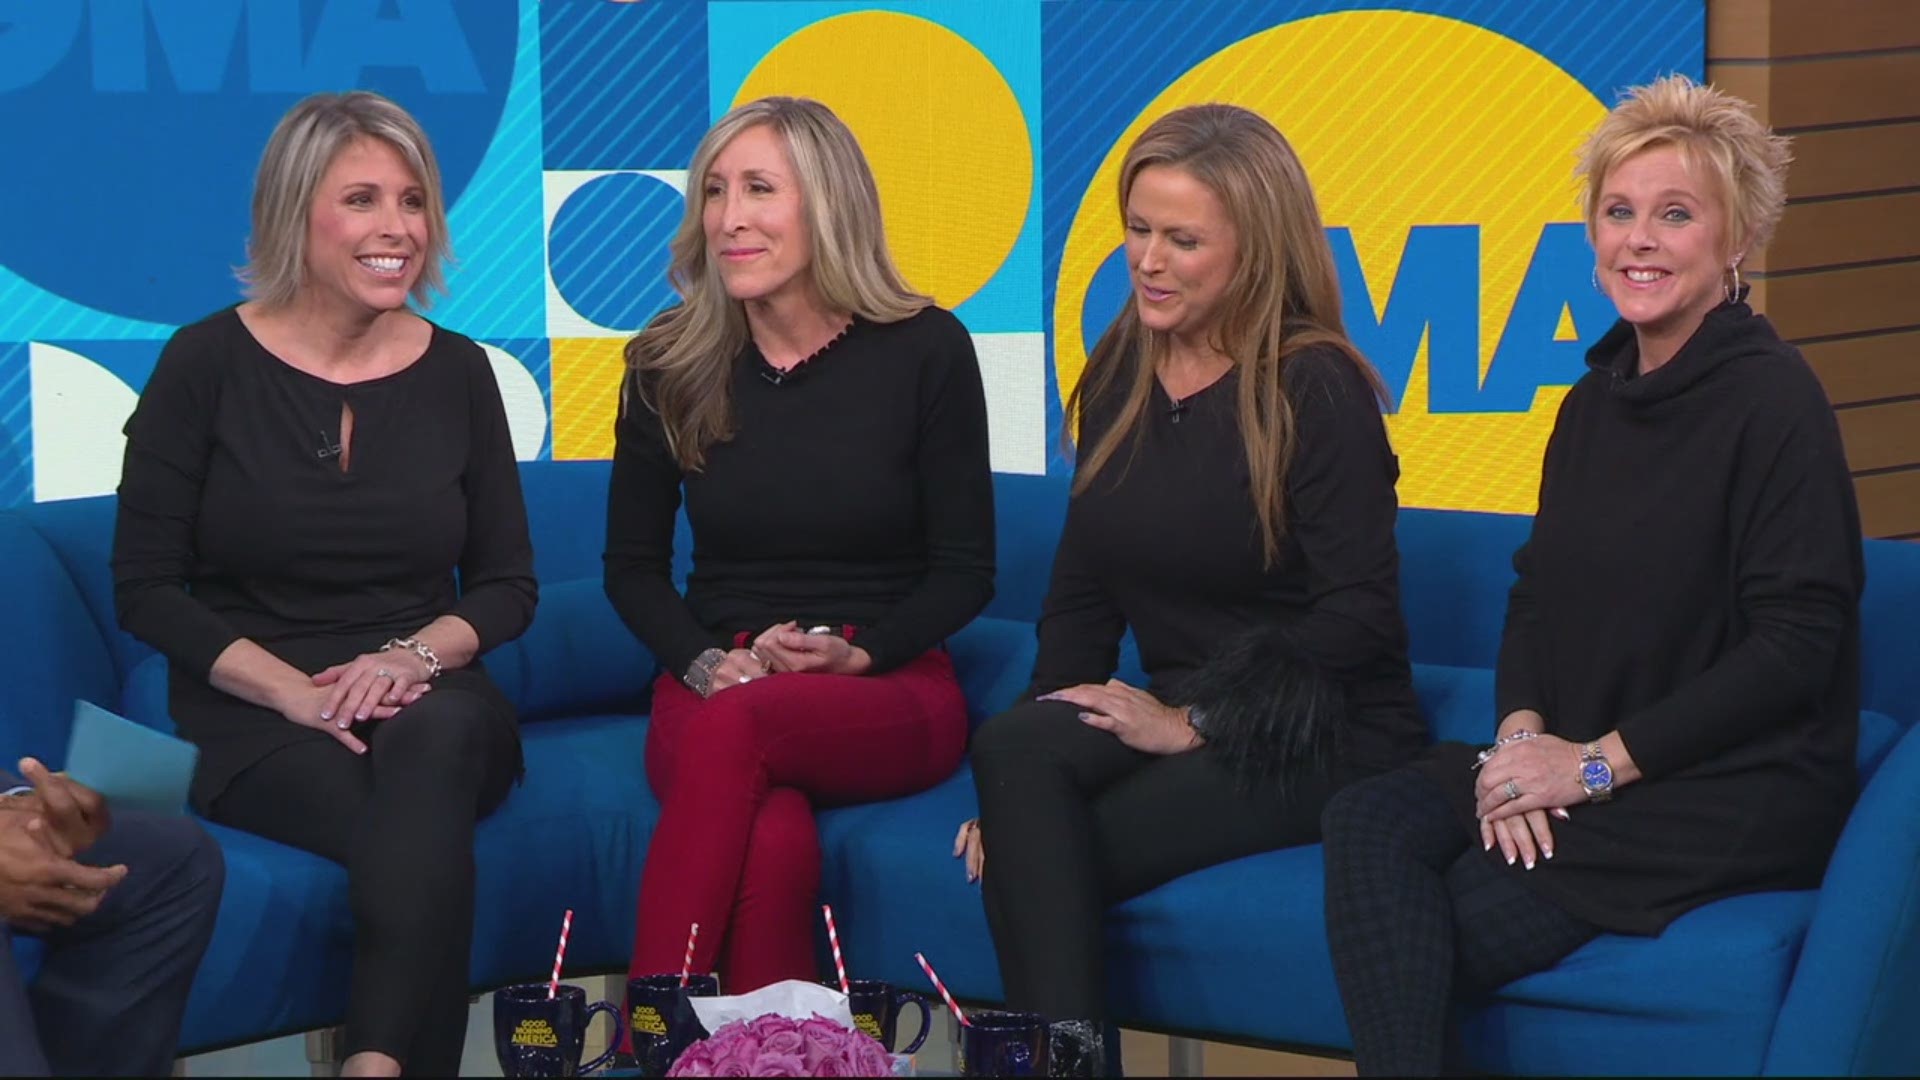 Four women with a really strong resemblance found out there was a reason. They were two sets of sisters. Twins Kristelle Harrington and Rachelle Dyer along with Lisa Vann and Shannon Nicoll shared their story on Good Morning America. Three of the women live in Virginia Beach. The other lives near Seattle.